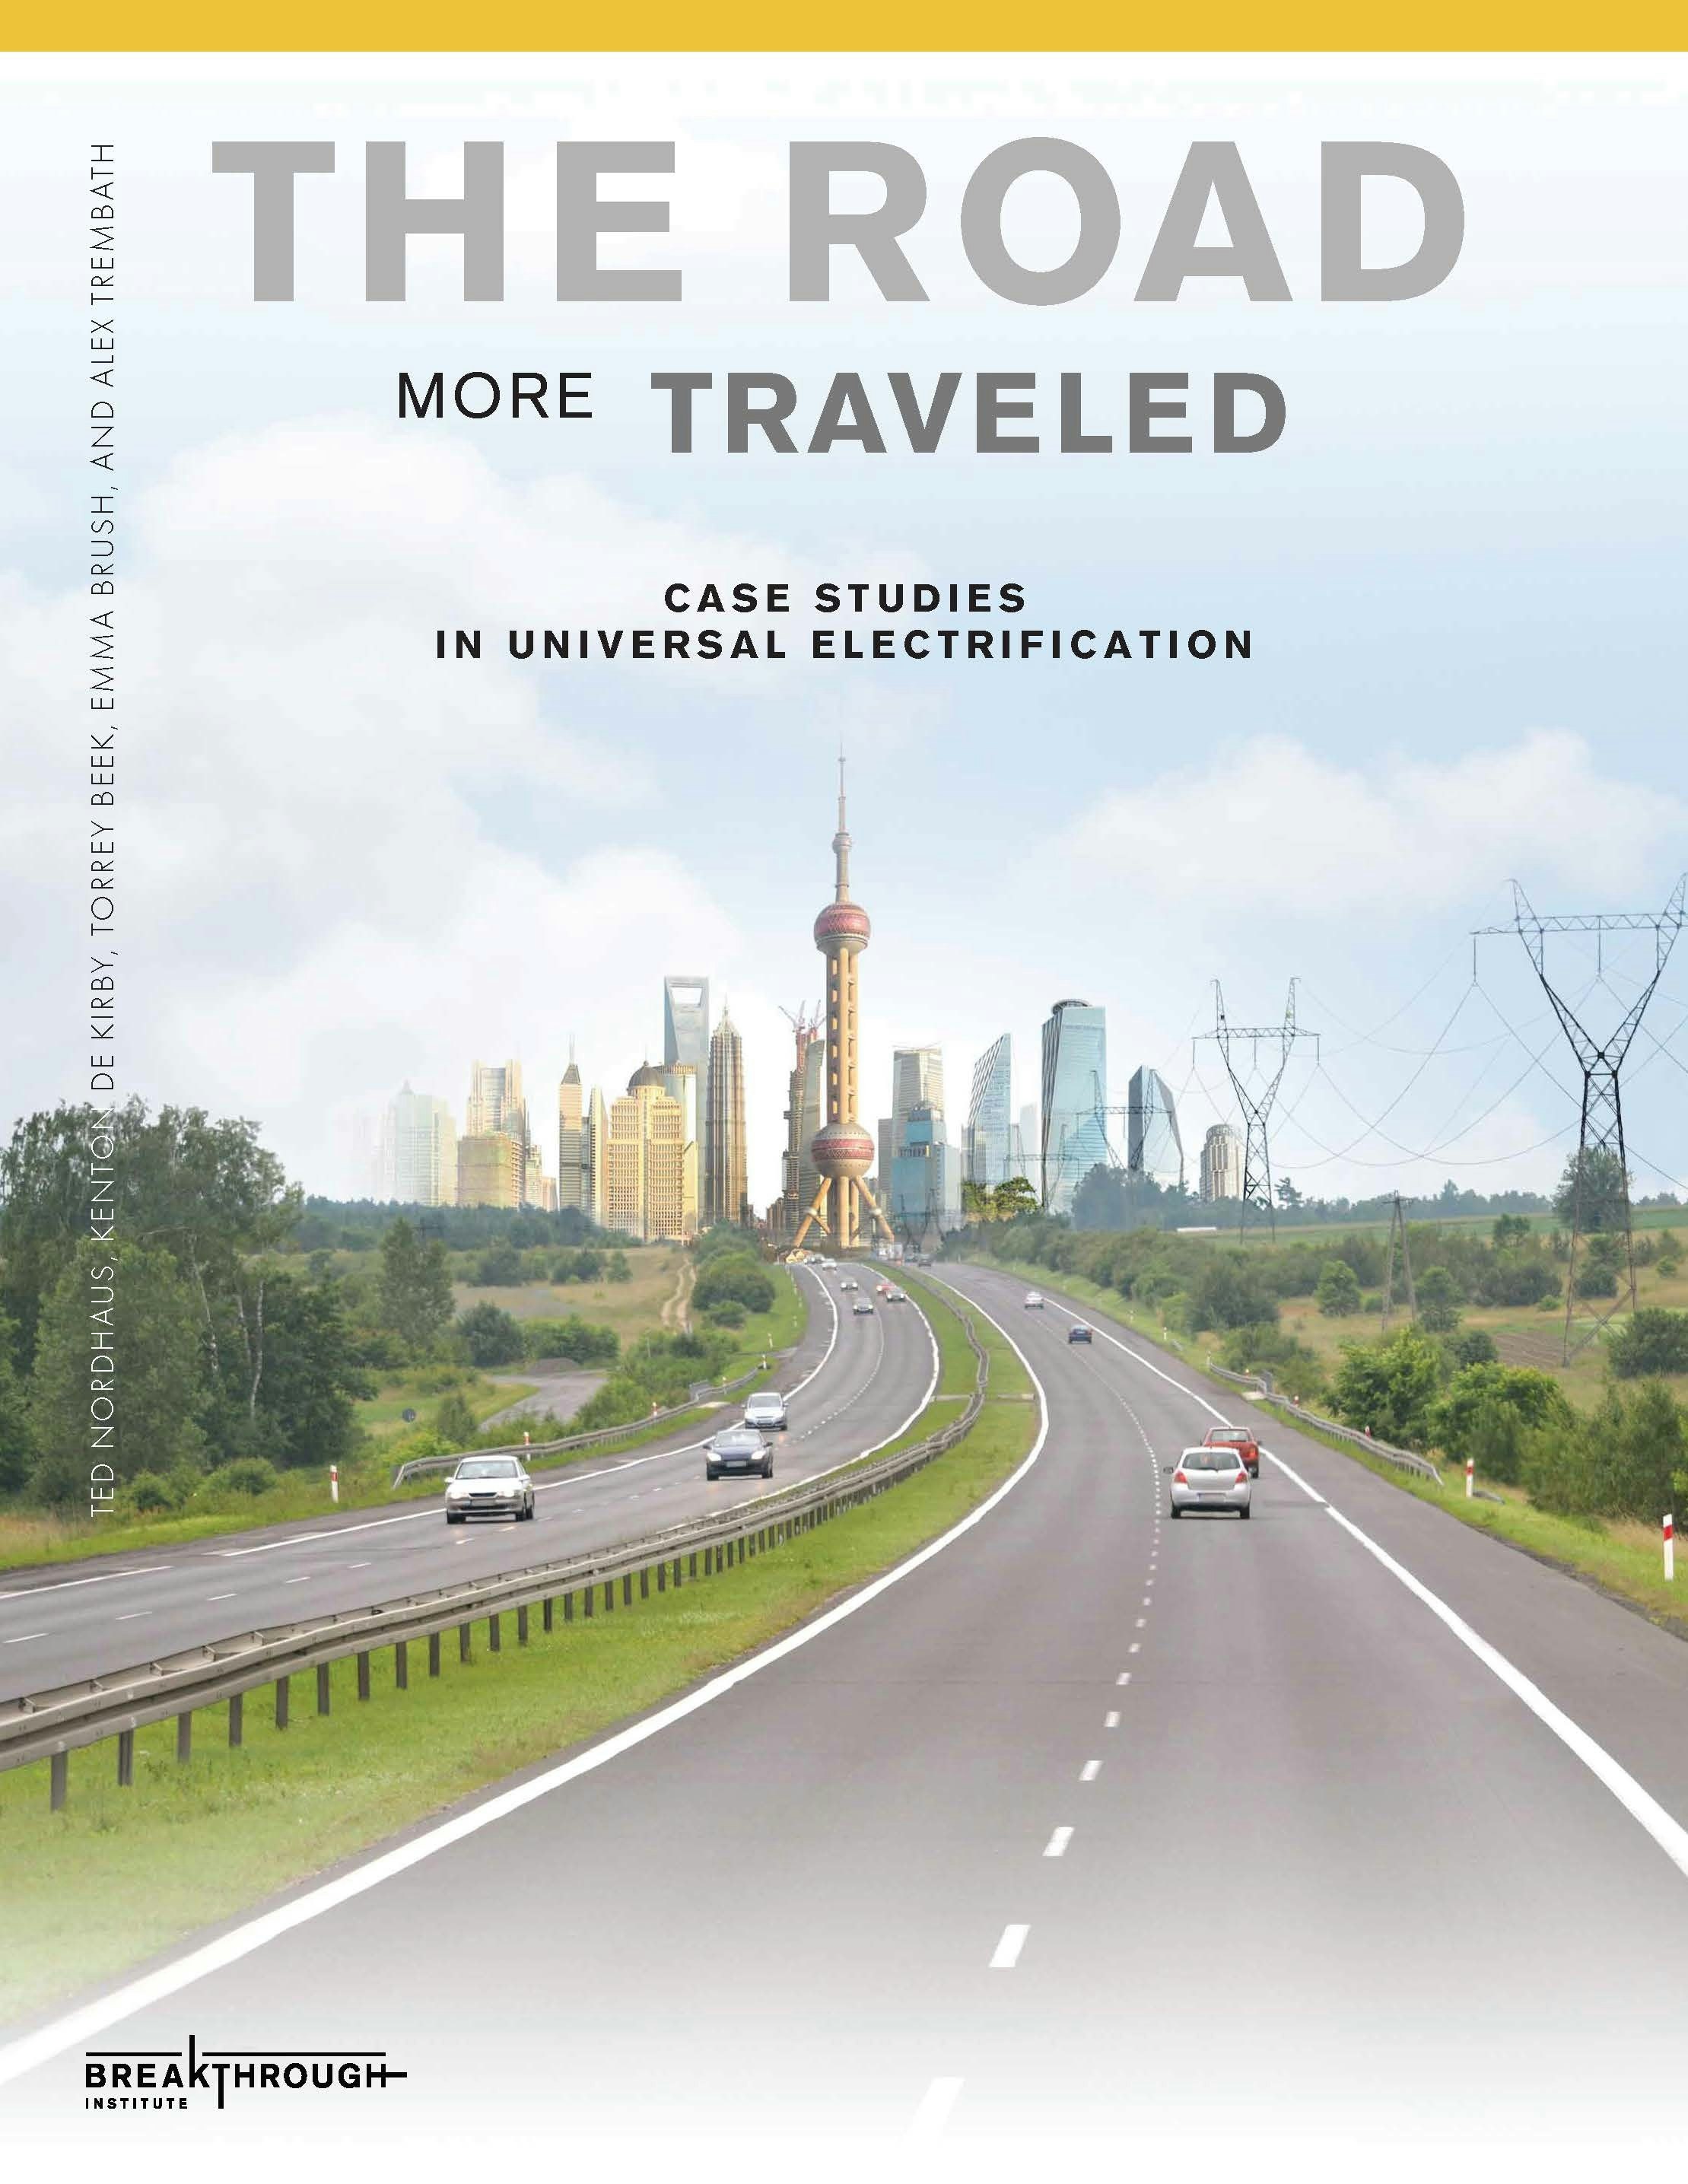 The Road More Traveled: Case Studies in Universal Electrification